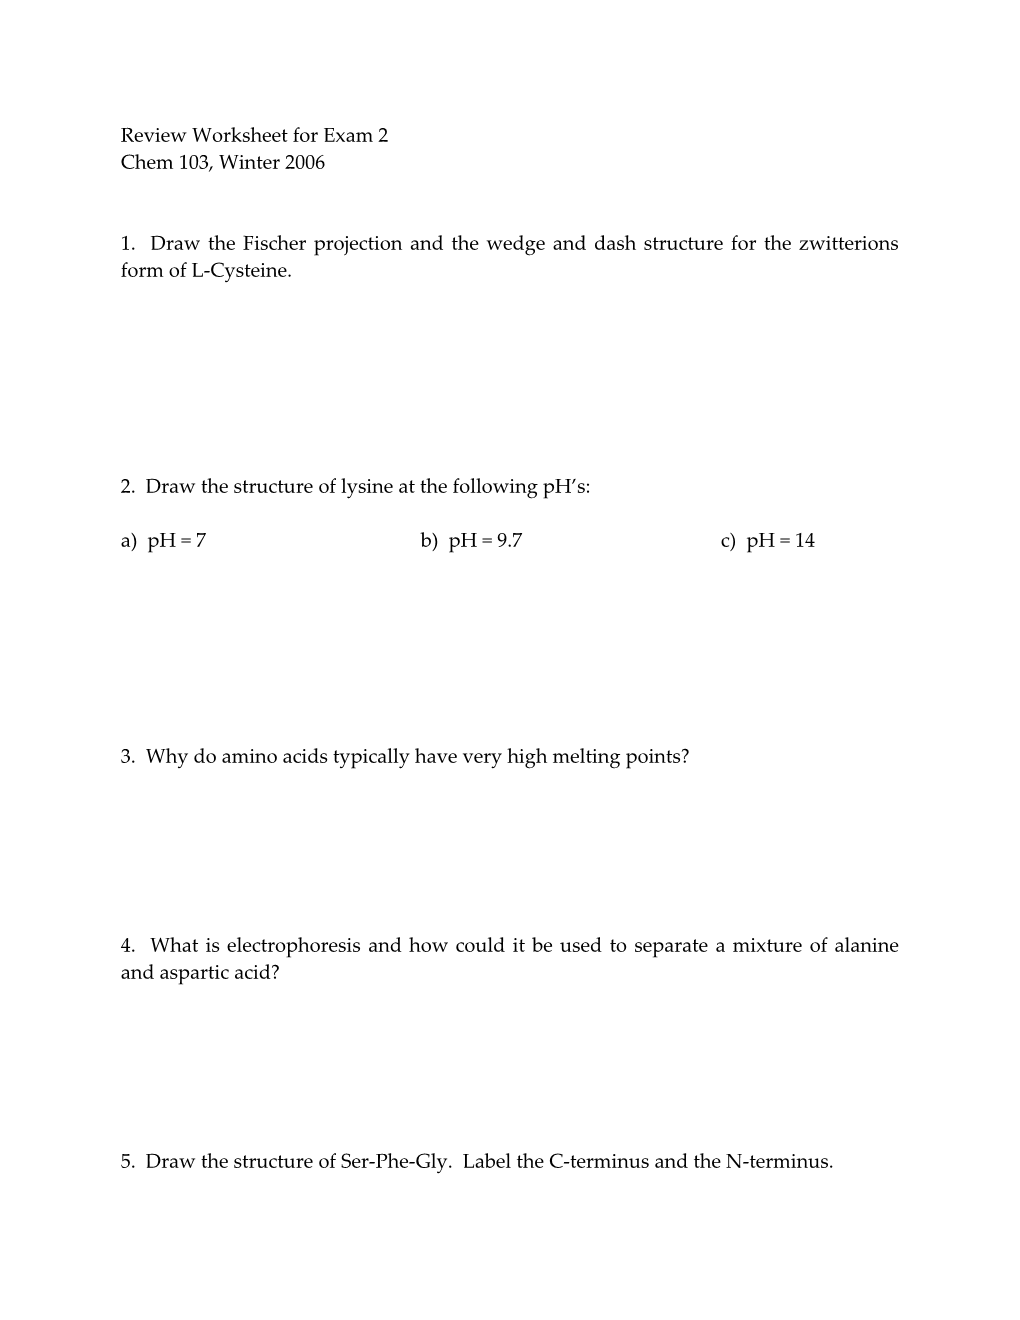 Review Worksheet for Exam 1